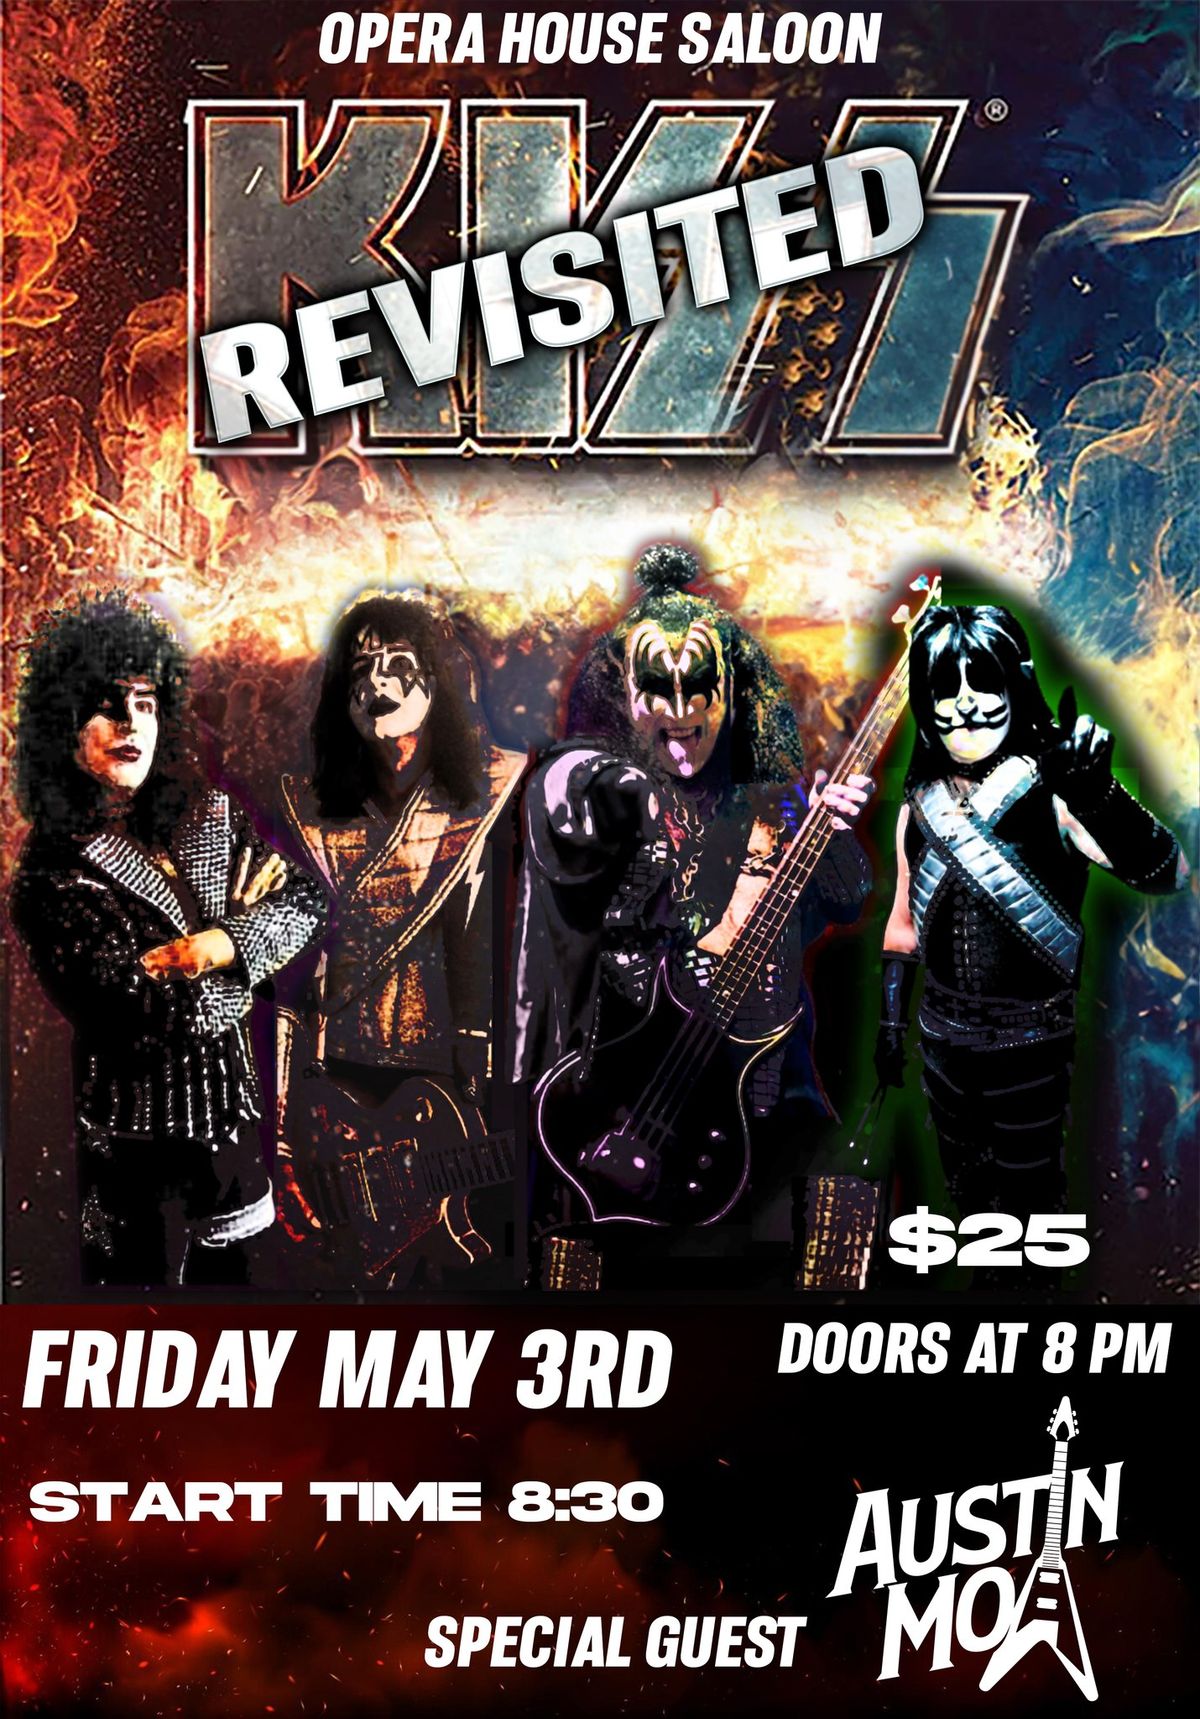 Kiss Revisited with special guest Austin Mo